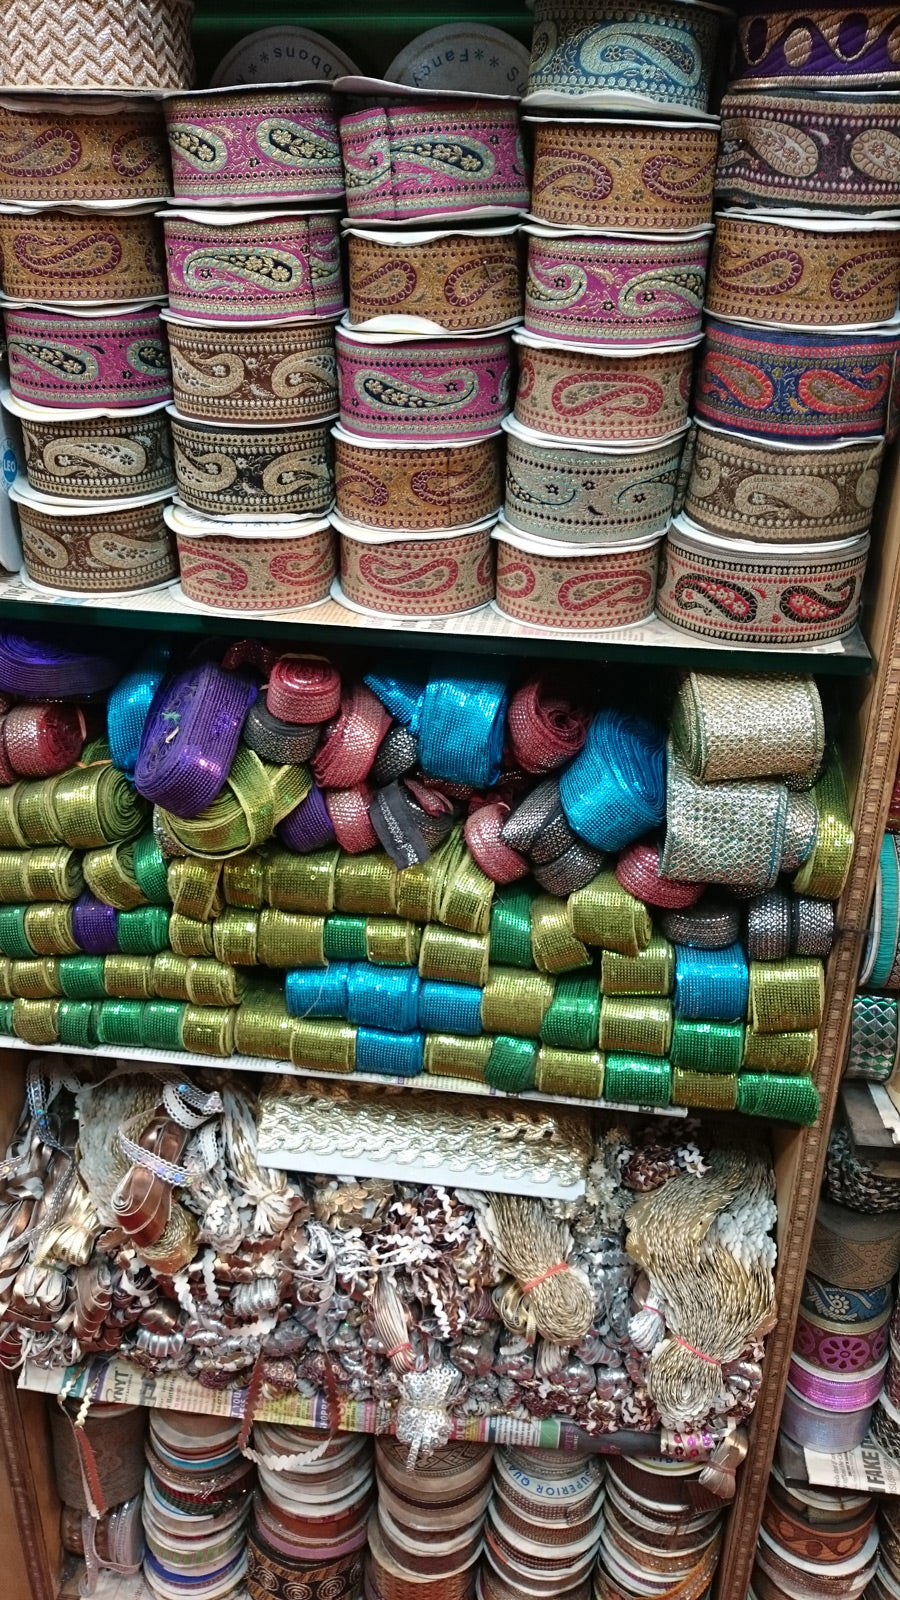 They say you can find anything you’re looking for in Chandni Chowk market. Adventures of finding Fair Trade jewelry supplies for Ten Thousand Villages.